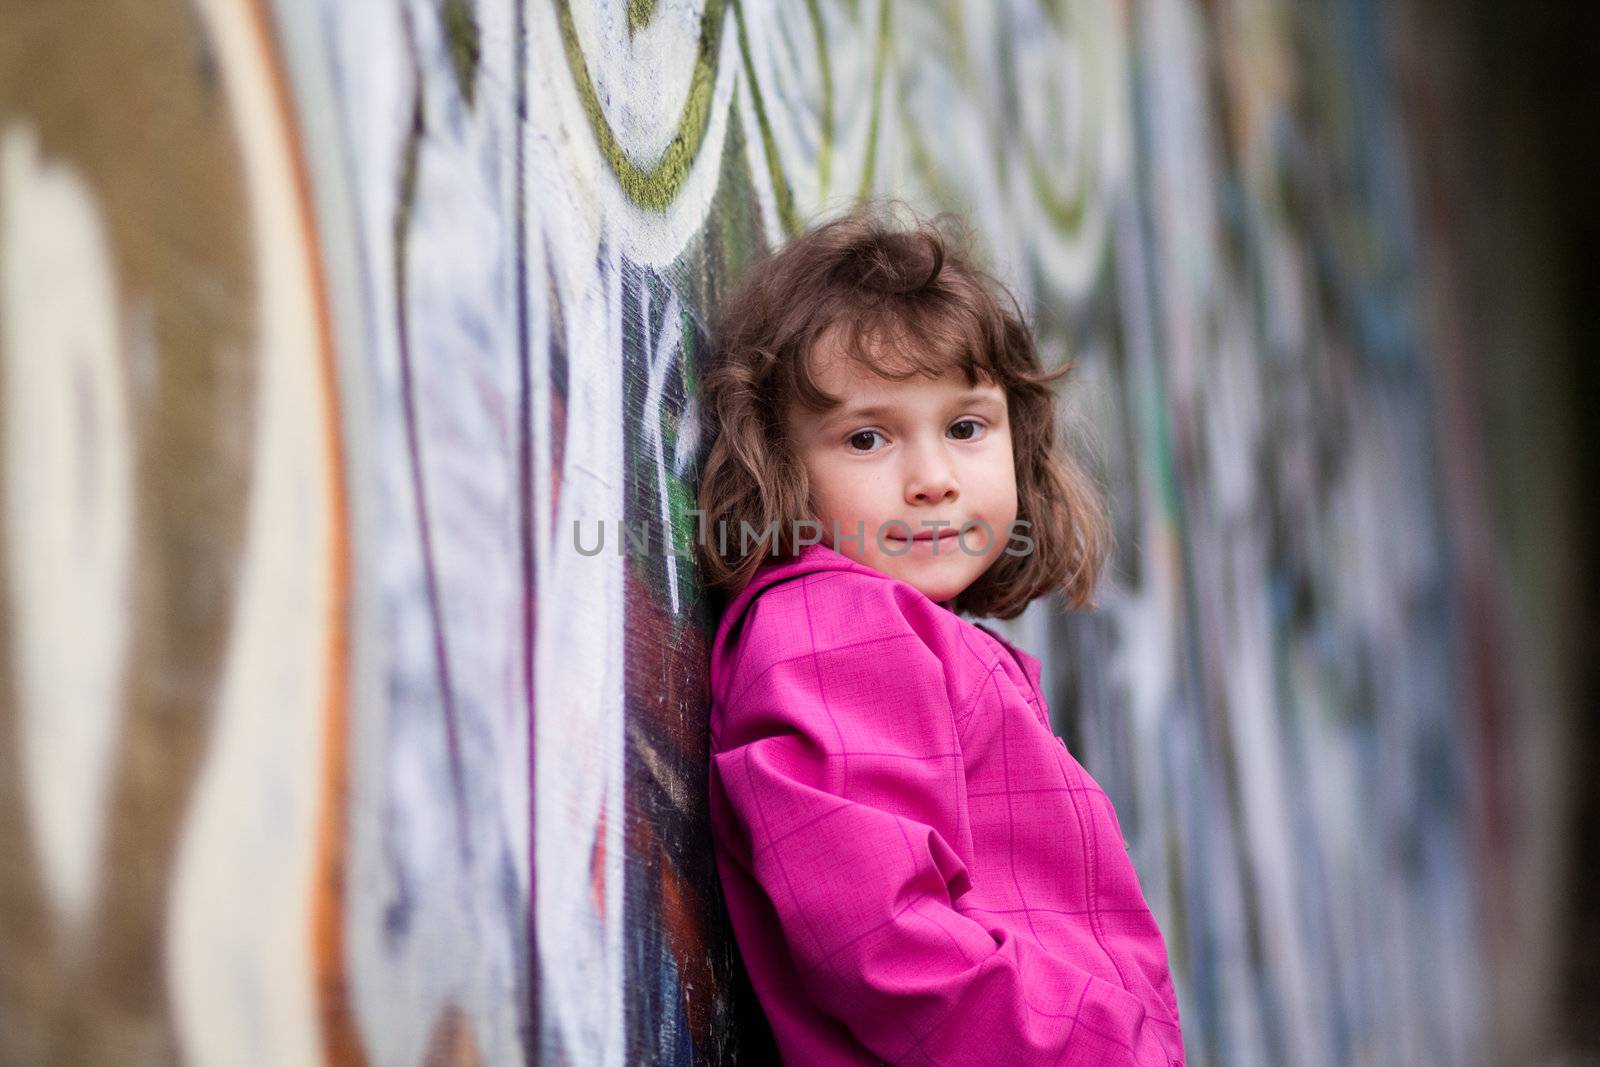 Little girl standing in front of a wall with graffiti